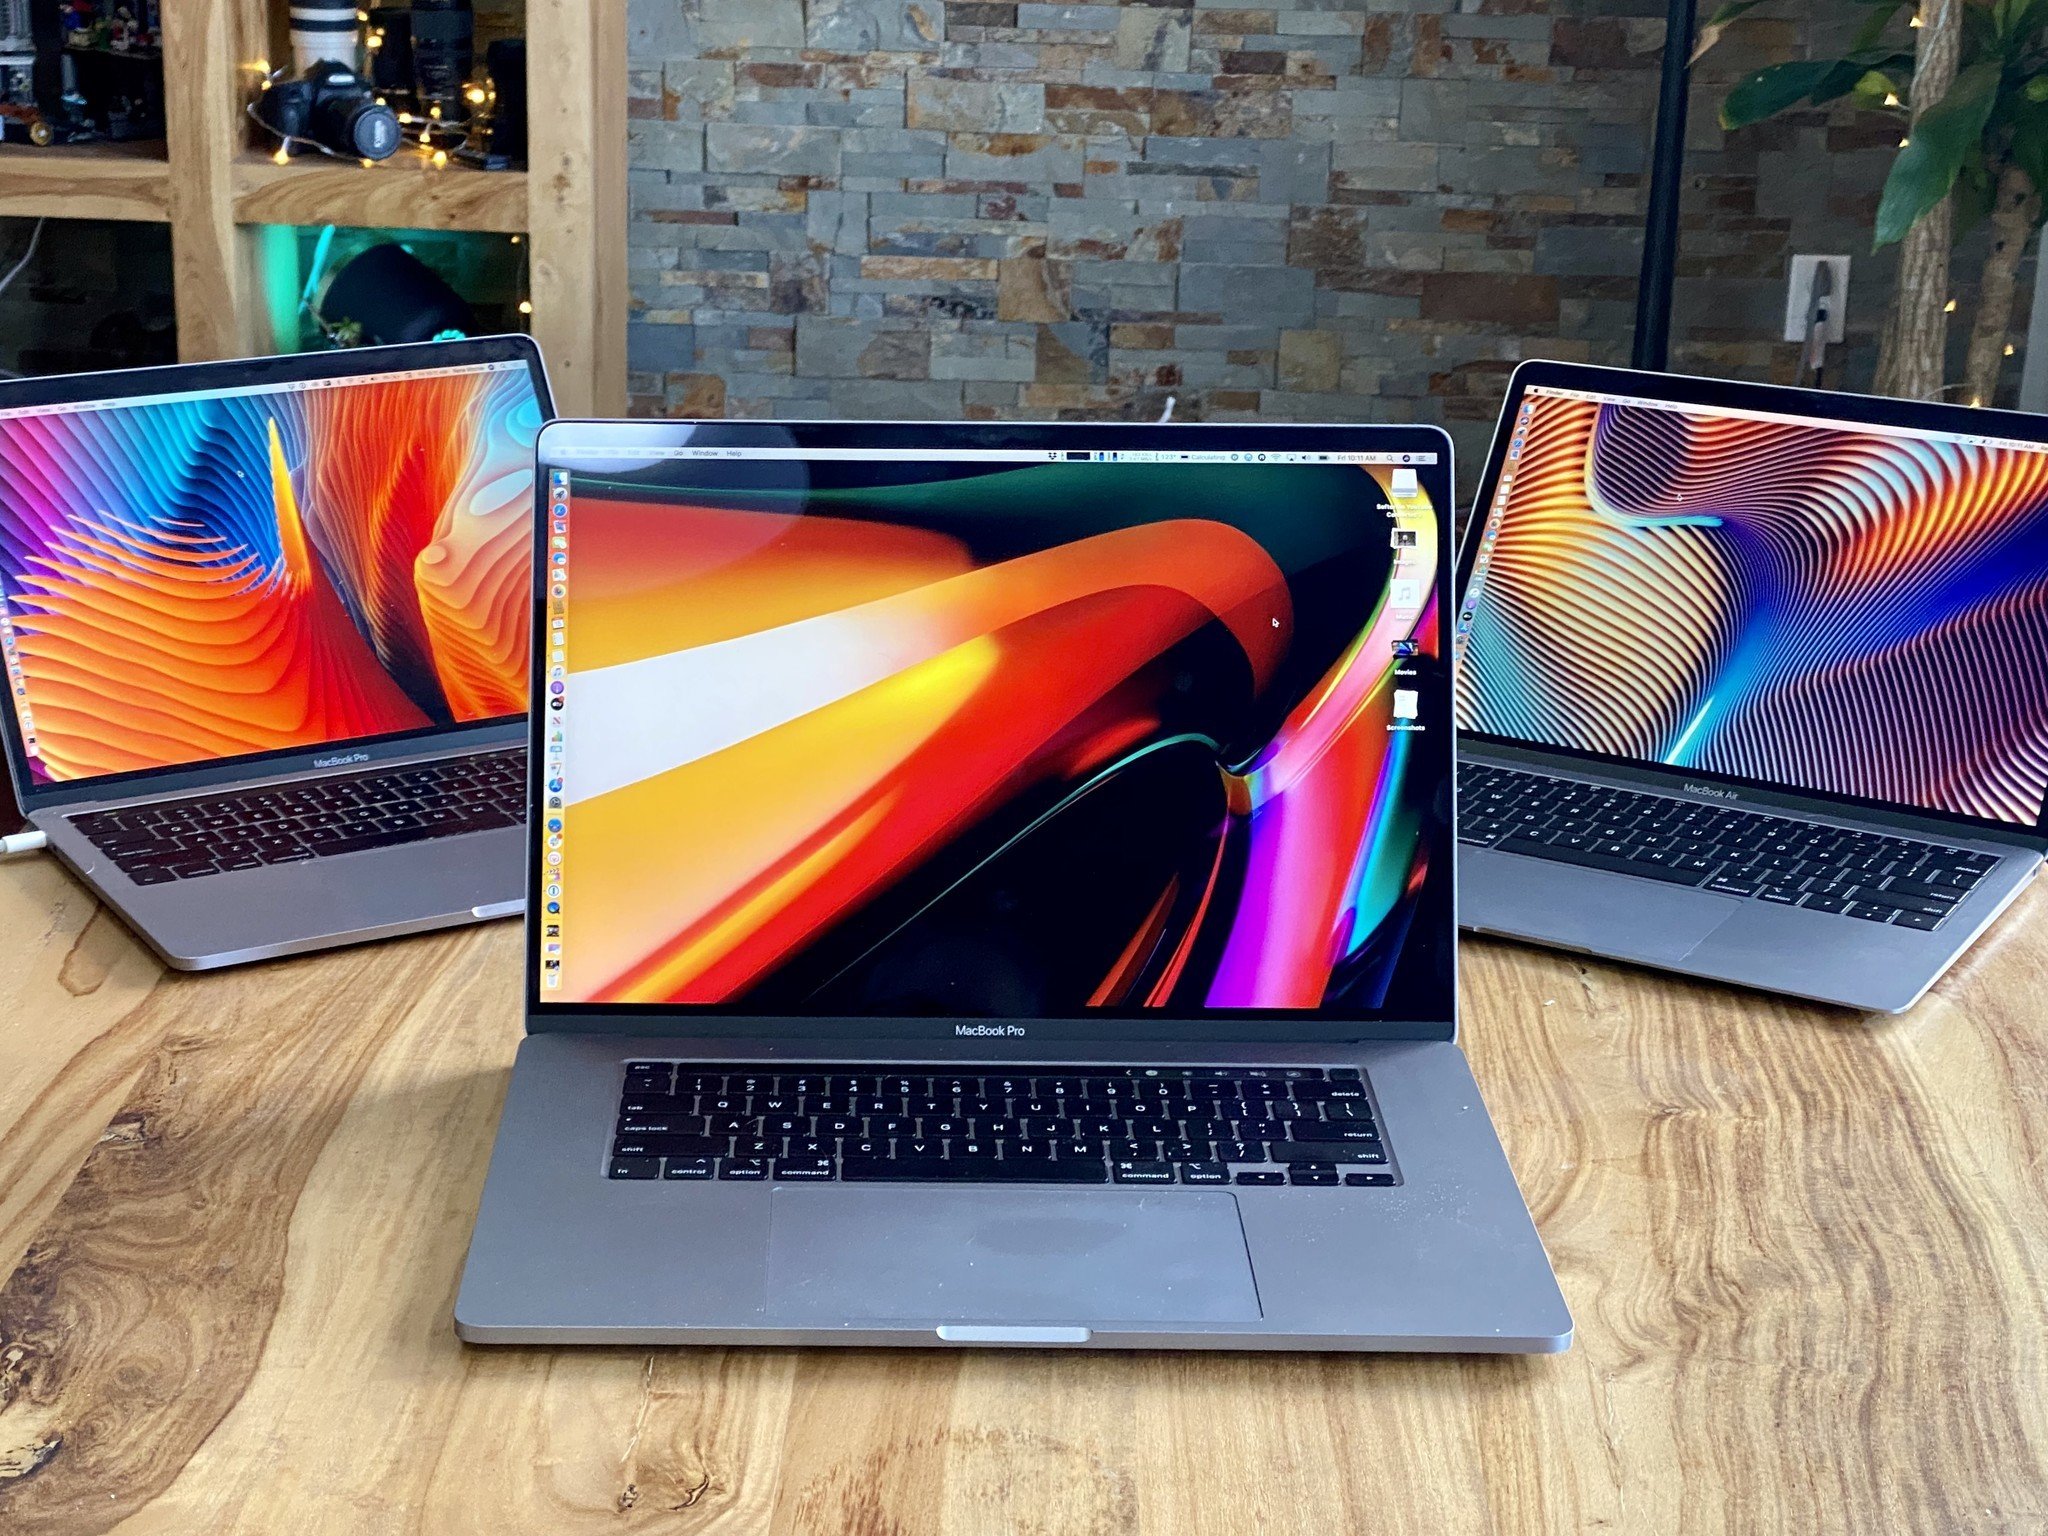 16 Inch Macbook Pro Vs 13 Inch Macbook Pro Vs Macbook Air Fight Imore